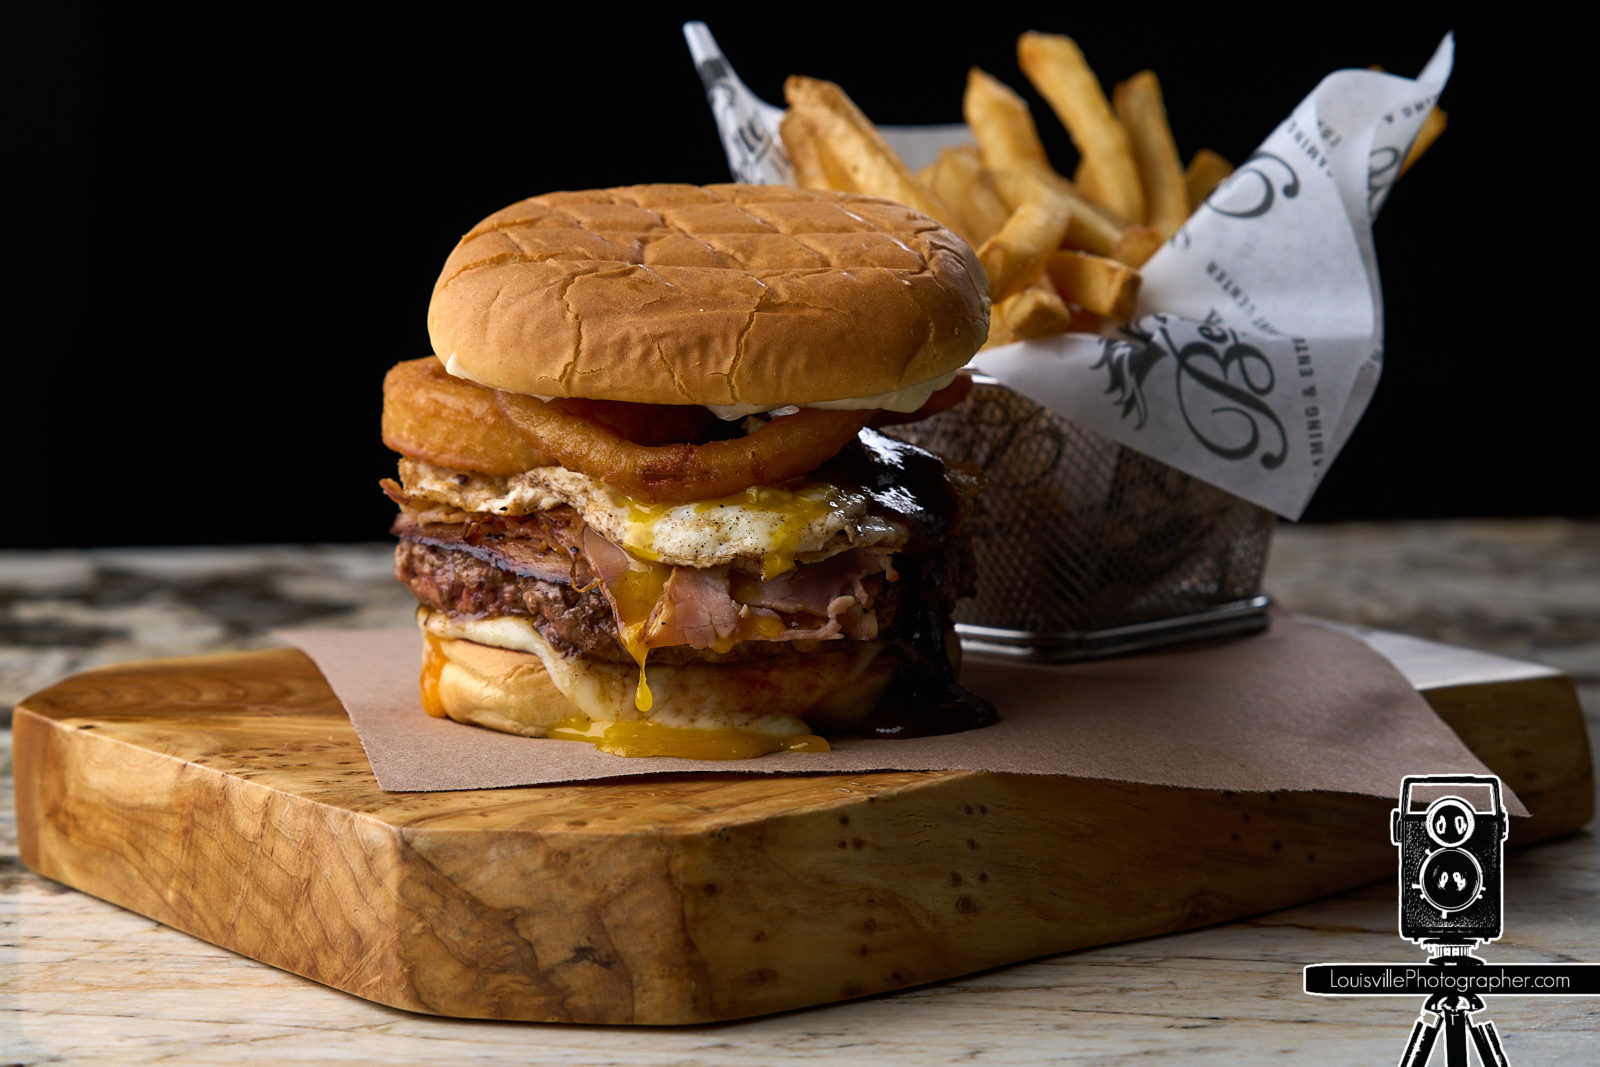 Louisville Commercial Food Photographer - It's Burger Time!